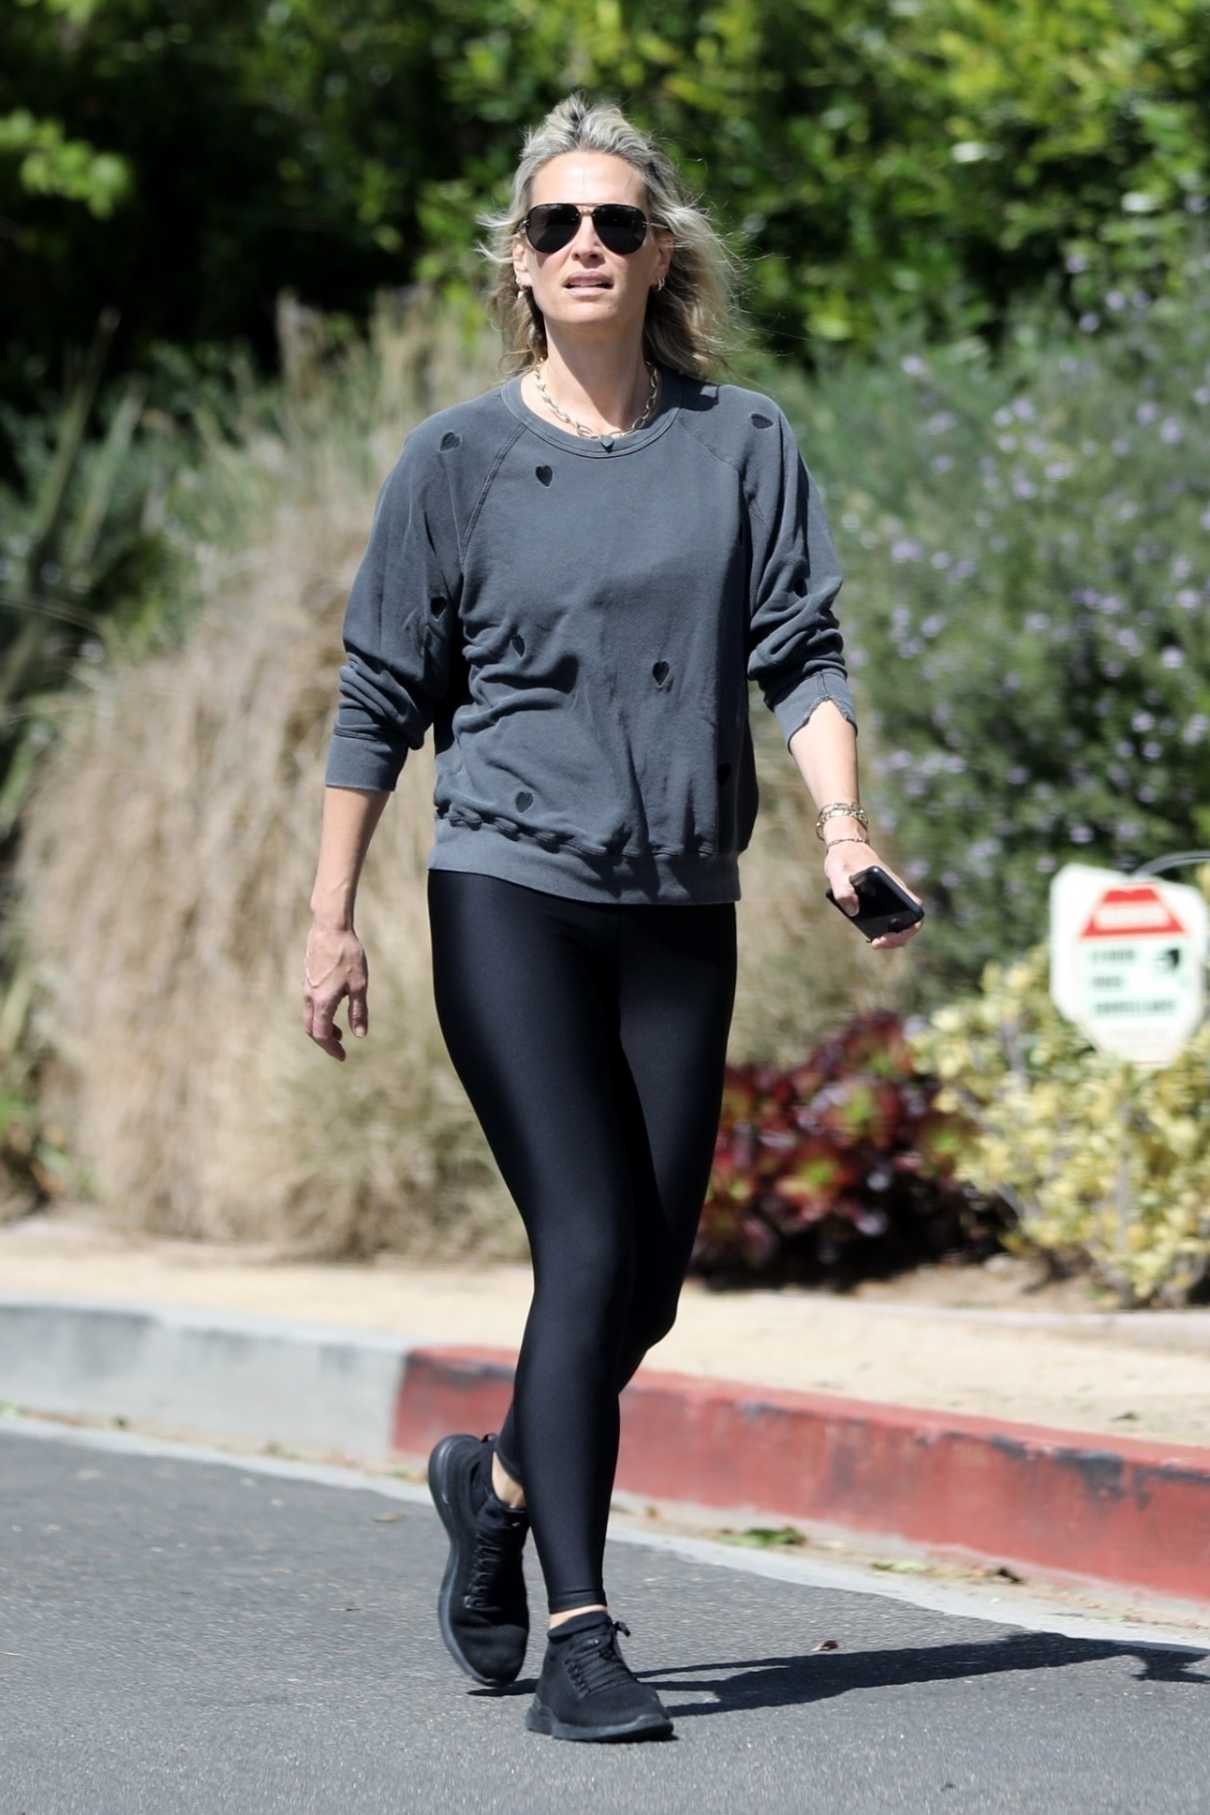 Molly Sims in a Black Sneakers